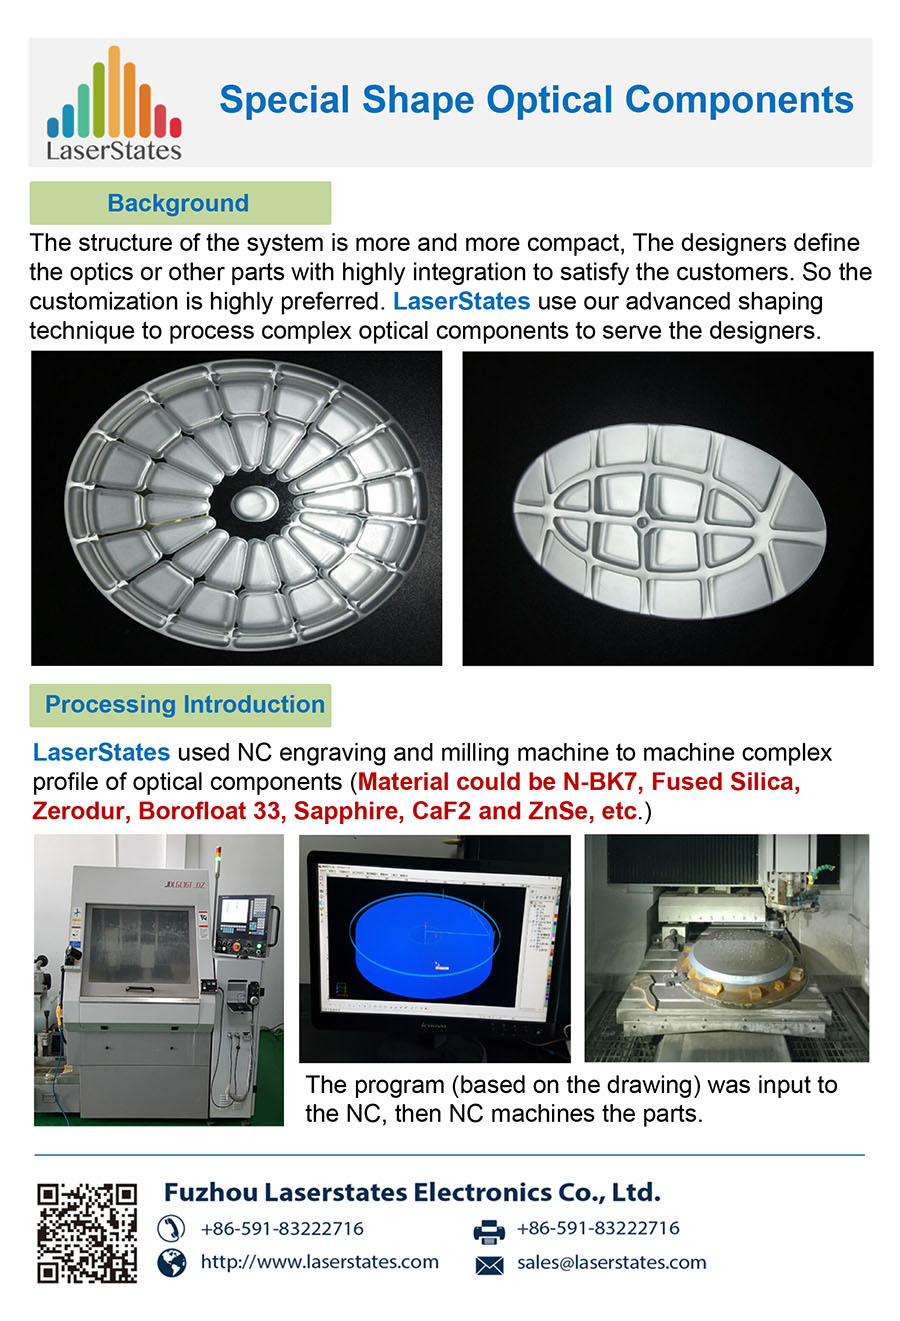 Beam Shapers for Lasers - Electrical Optical Components, Inc.